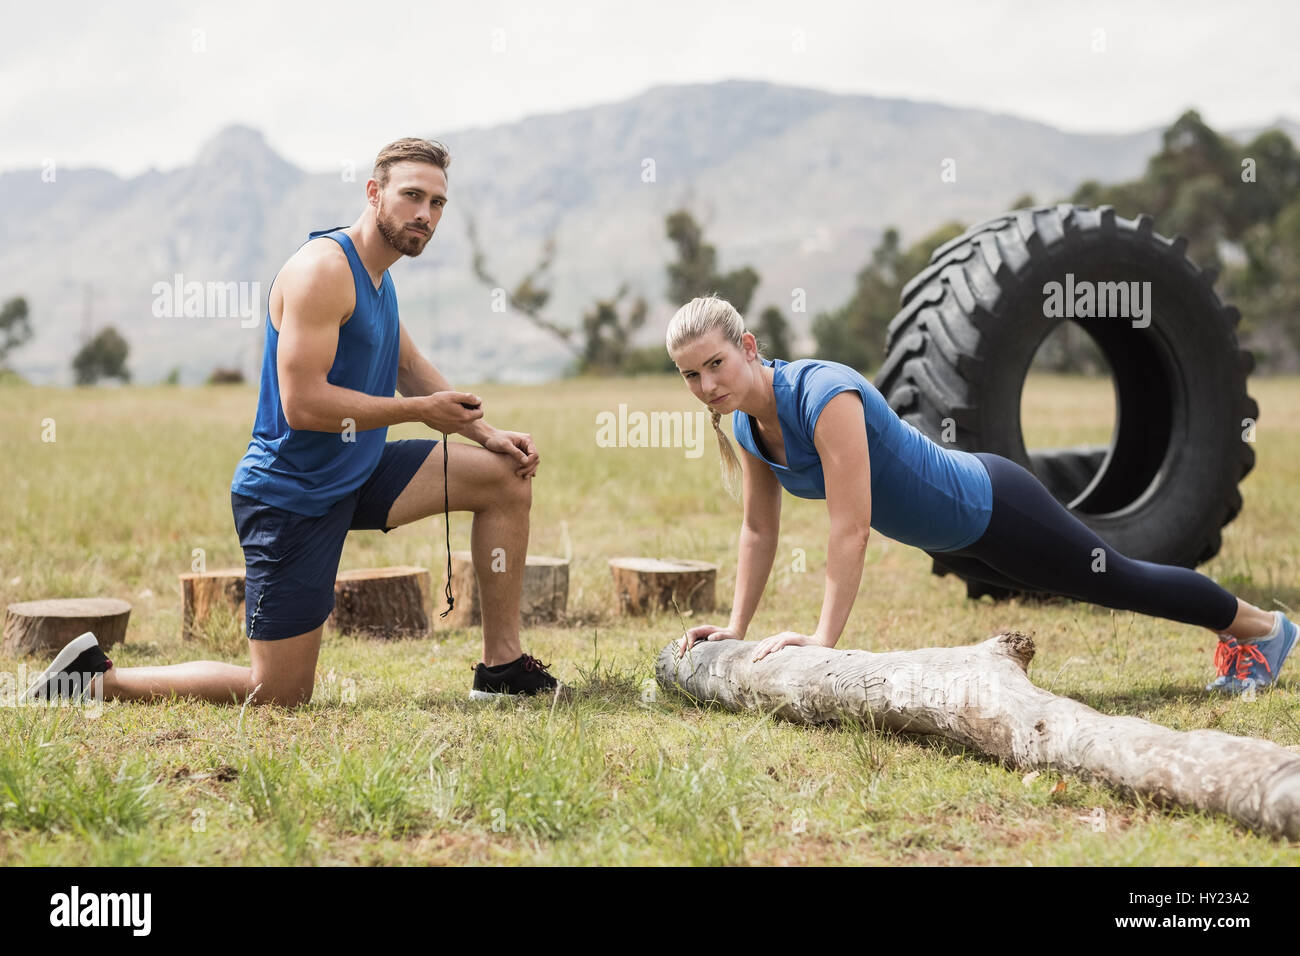 A Healthy Man is Push-up in the Forest Stock Photo - Image of muscular,  beatiful: 41762138